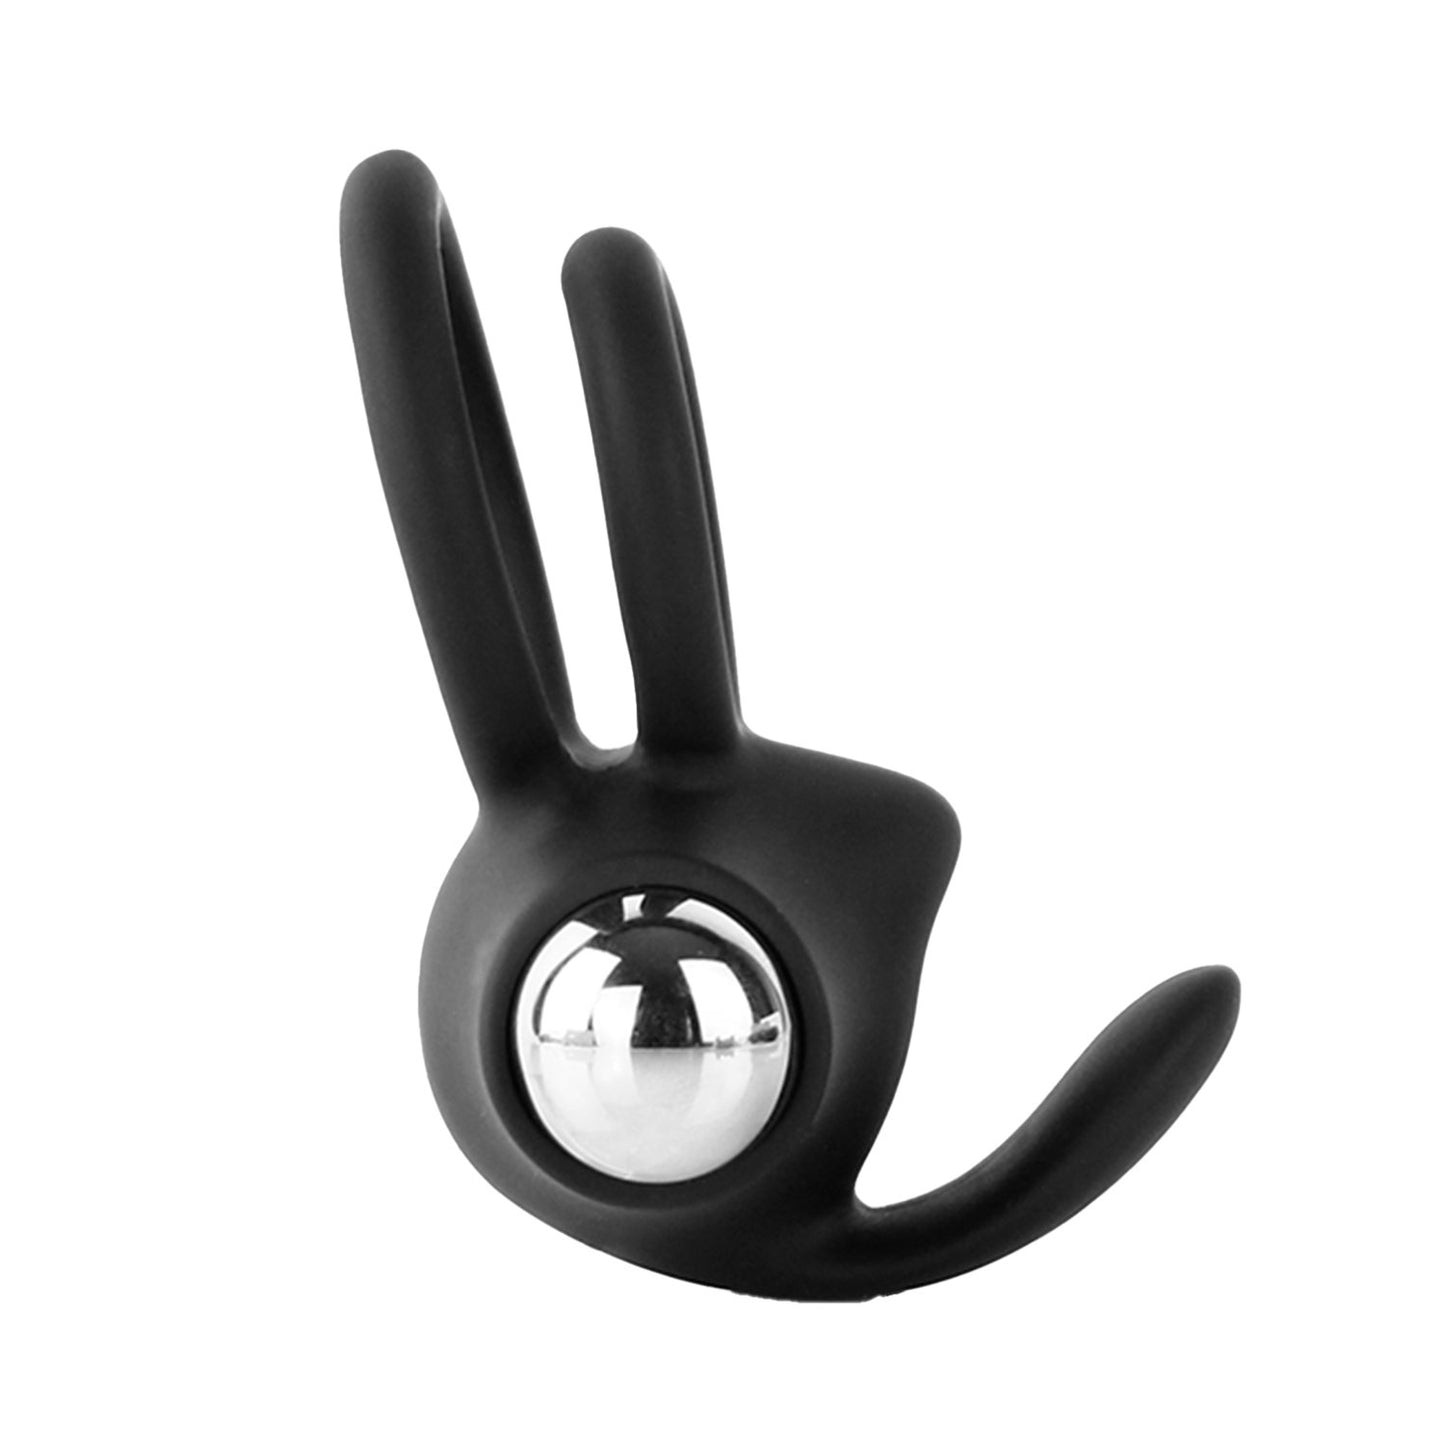 The Horny Company - John O BOOST Rechargeable Vibrating Tongue Dual Cock Ring